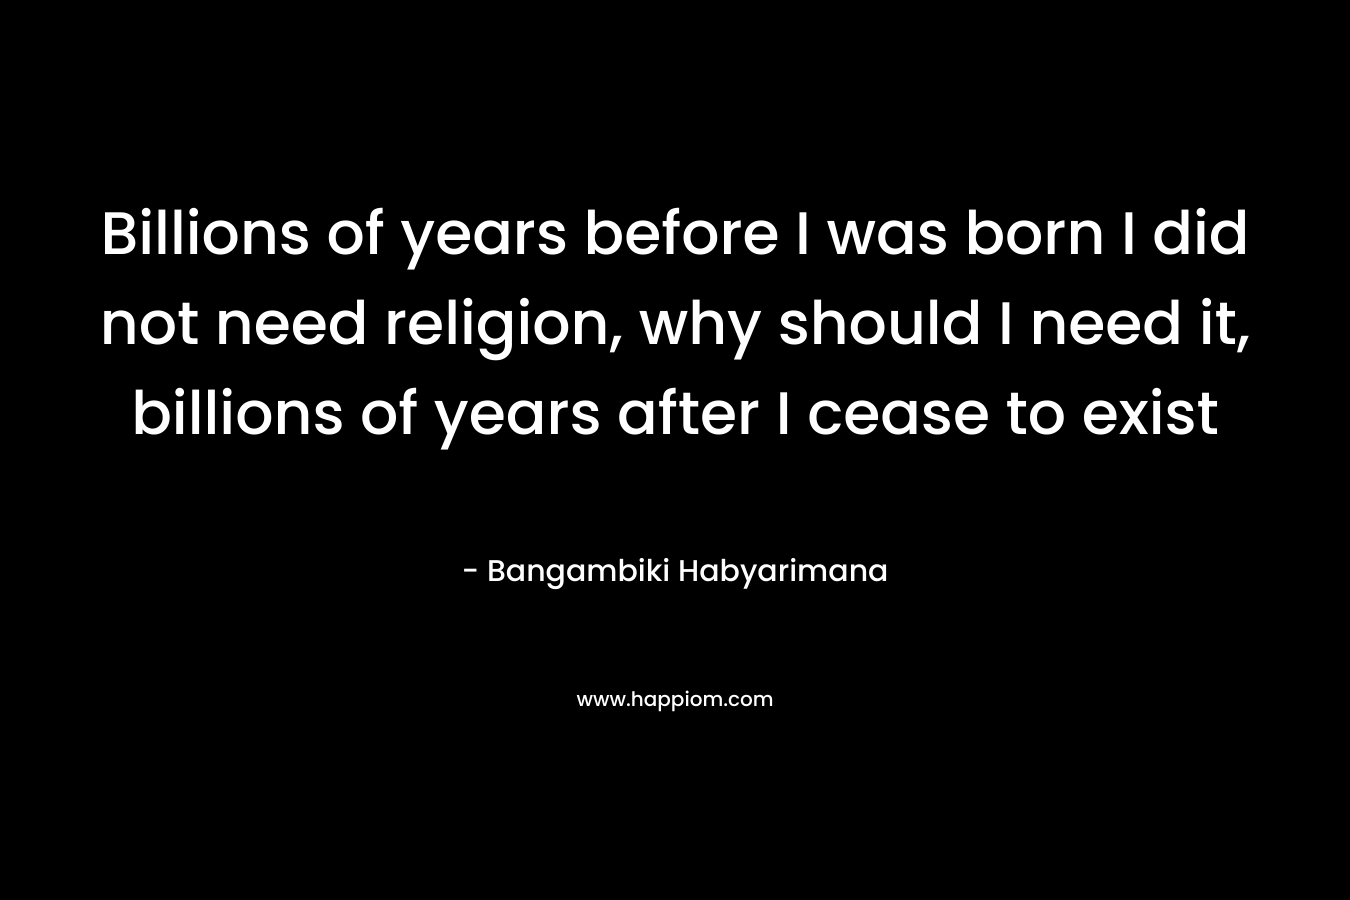 Billions of years before I was born I did not need religion, why should I need it, billions of years after I cease to exist – Bangambiki Habyarimana